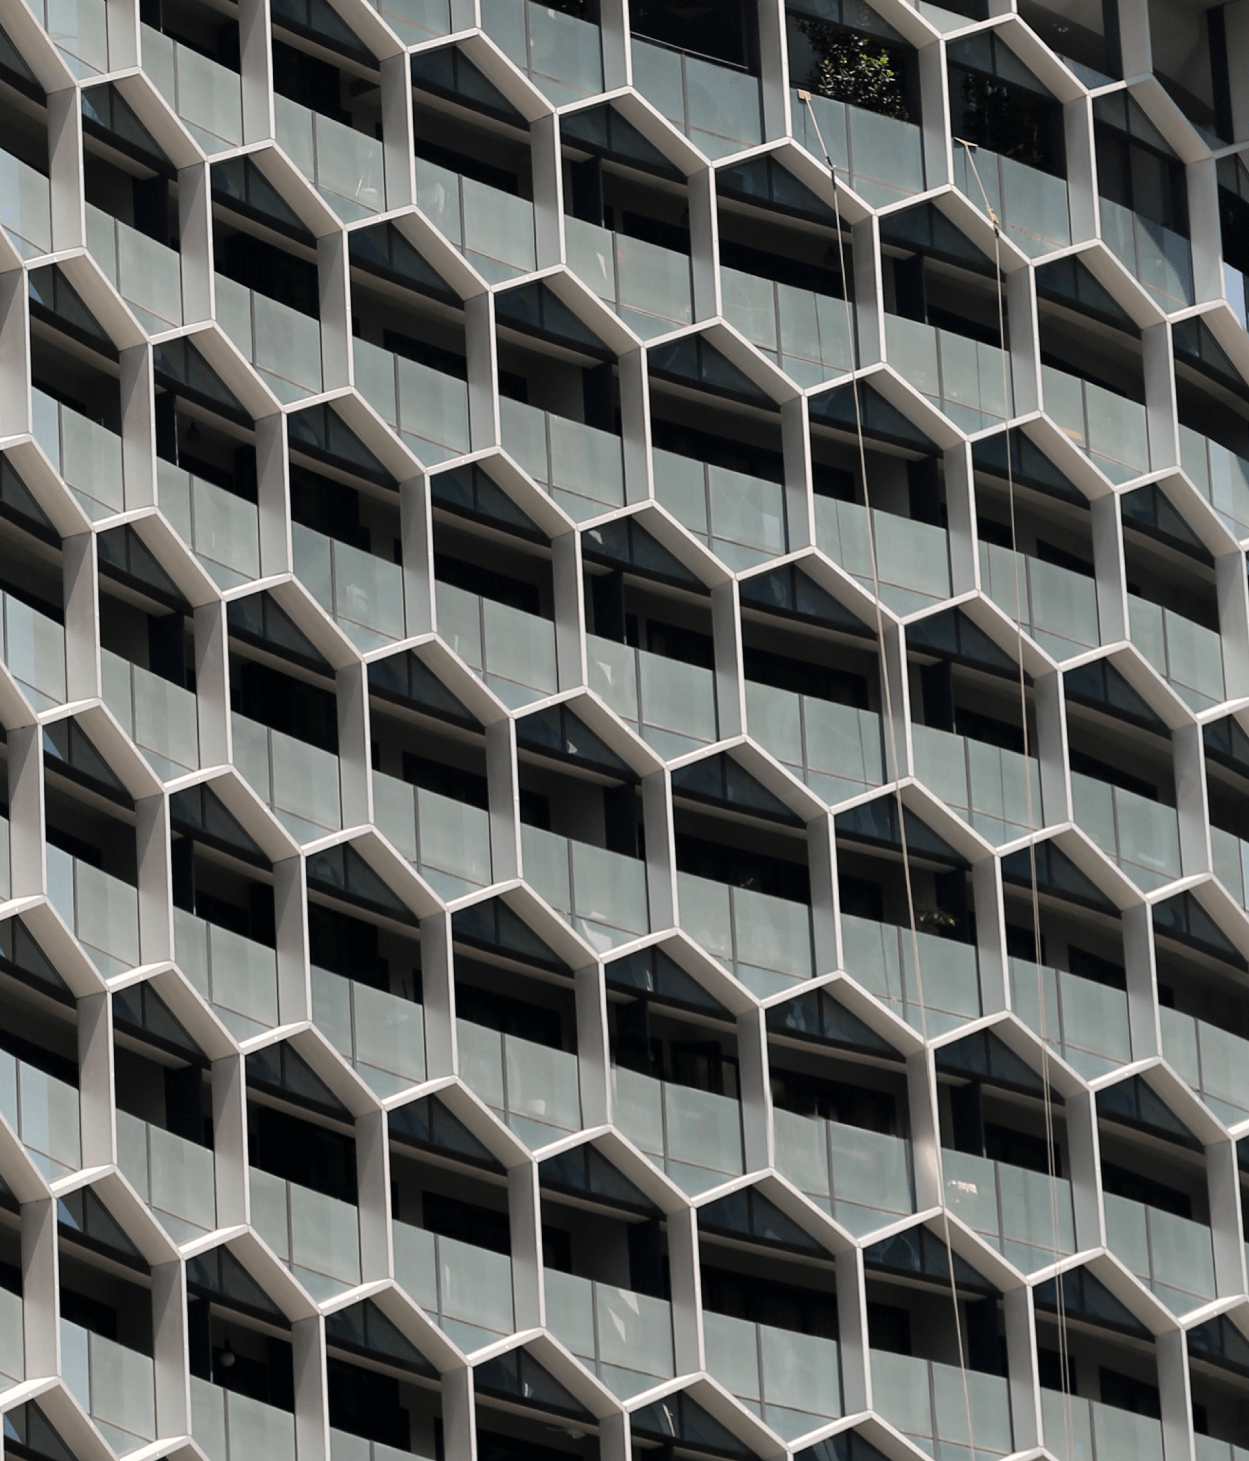 Honeycomb architecture in a Singapore skyscraper. Office building